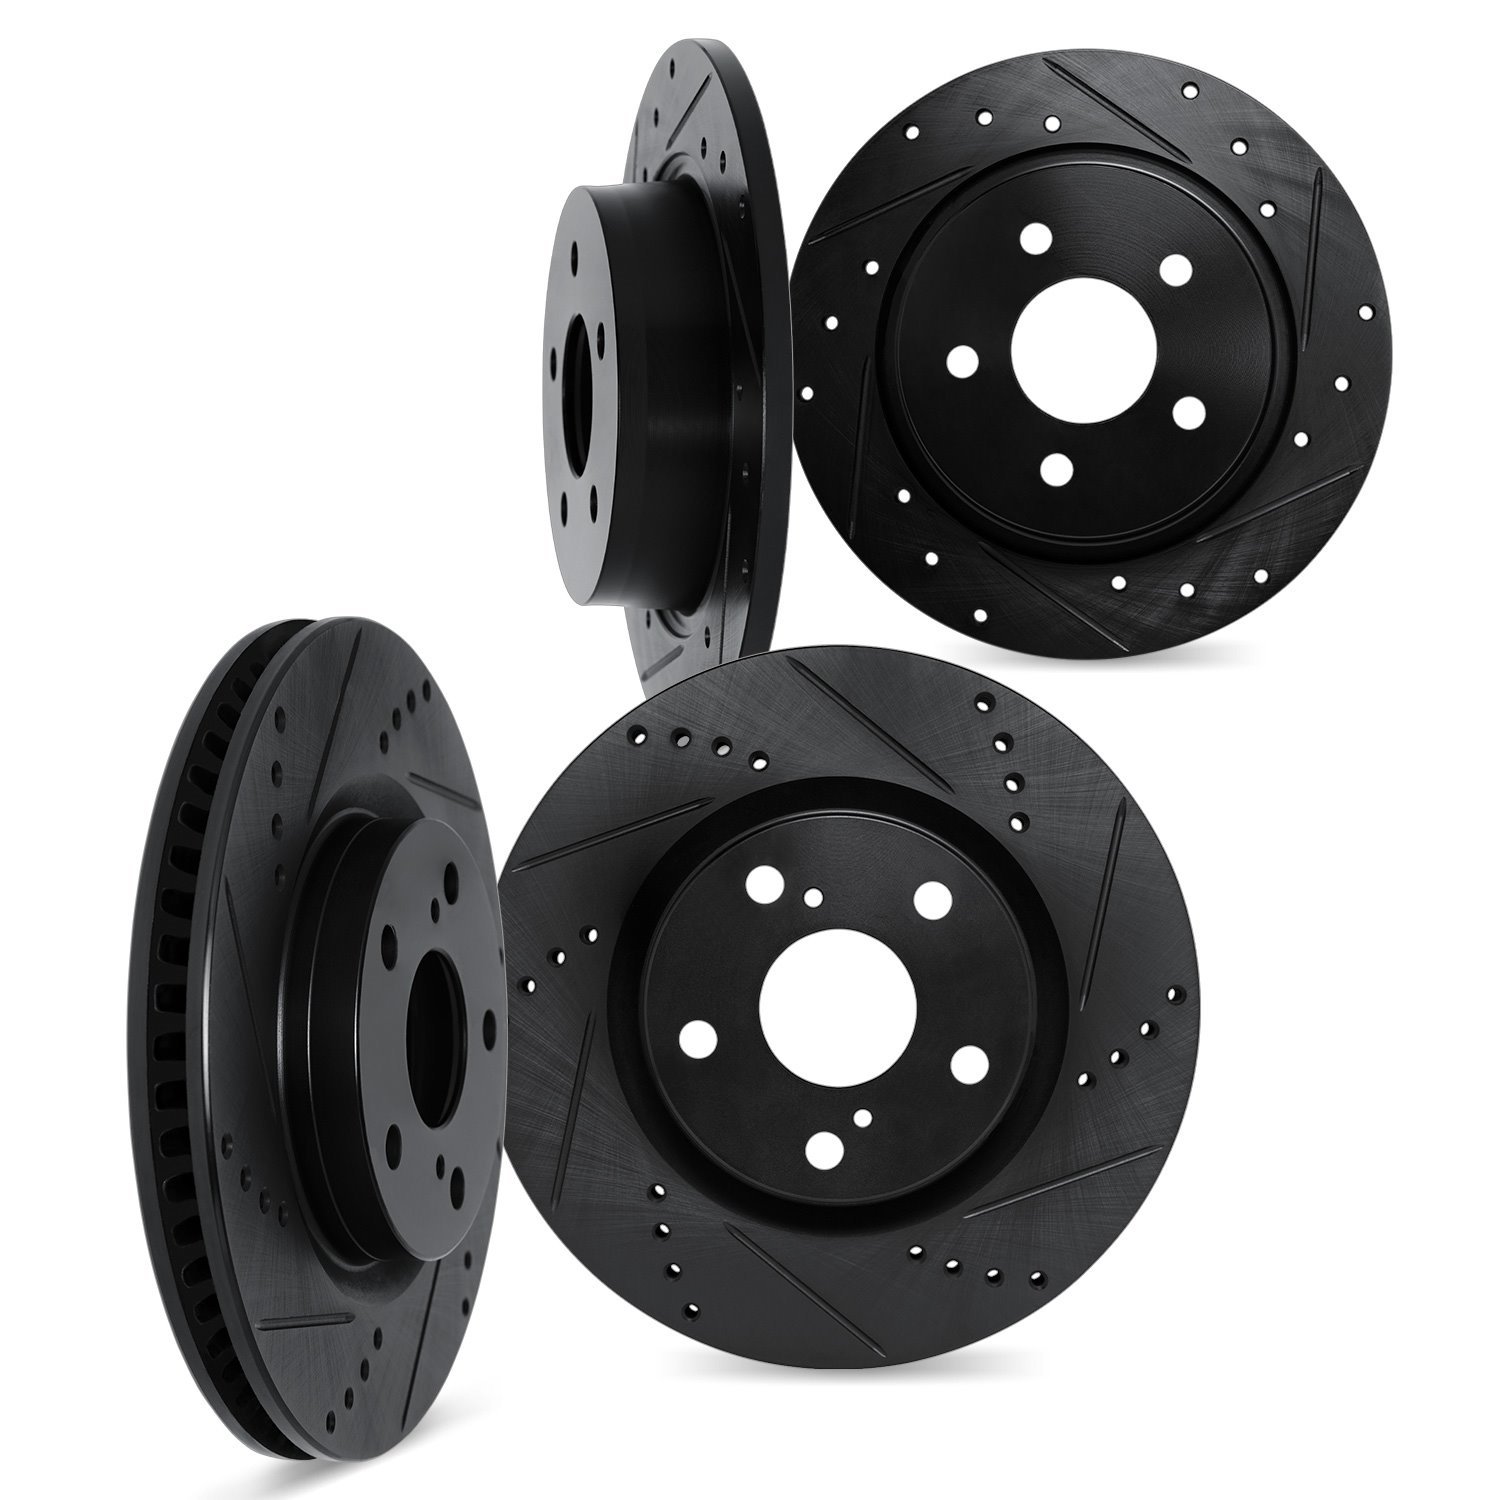 8004-76148 Drilled/Slotted Brake Rotors [Black], 2004-2010 Lexus/Toyota/Scion, Position: Front and Rear